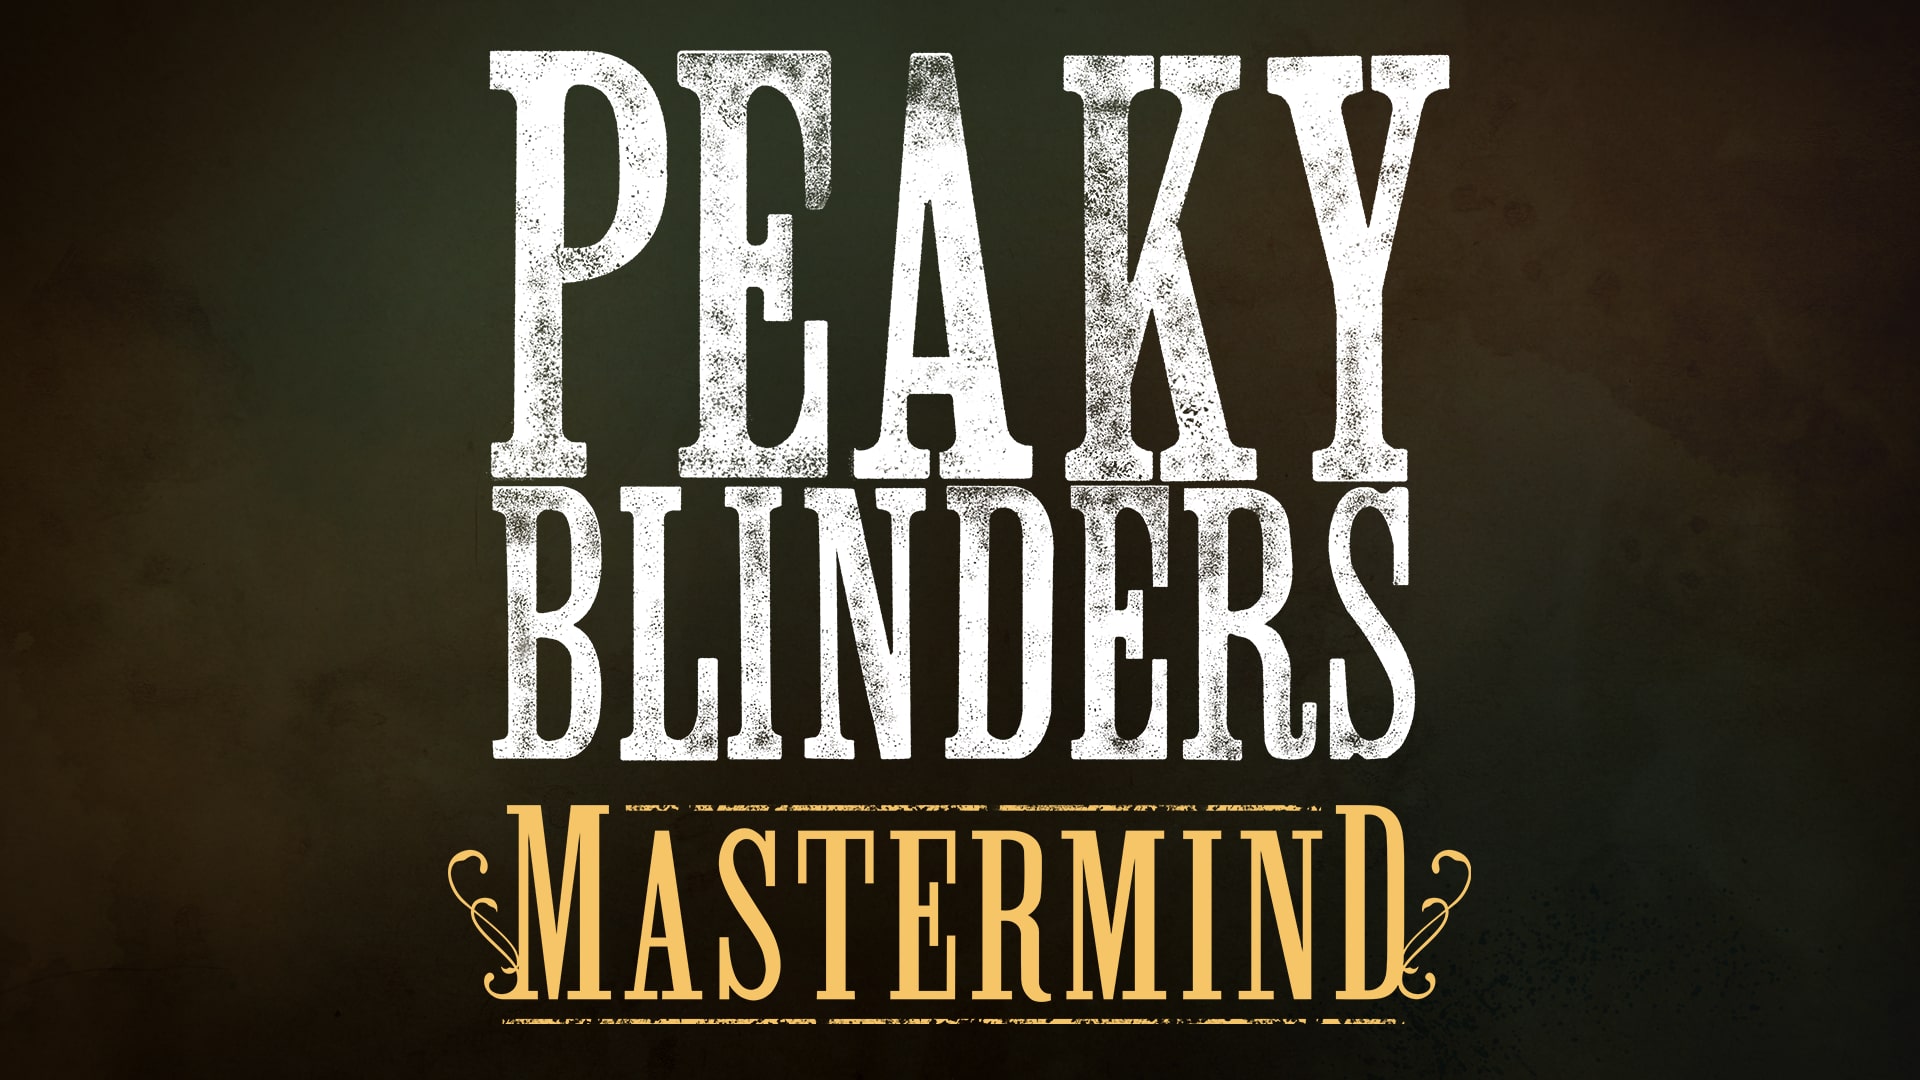 Peaky Blinders Metal Wall Sign - Fixings Included - By Order of the Peaky  Blinders - Rustic Plaque Gift Merchandise Merch Man Cave Signs and  Accessories 20cm x 15cm for Men Picture :